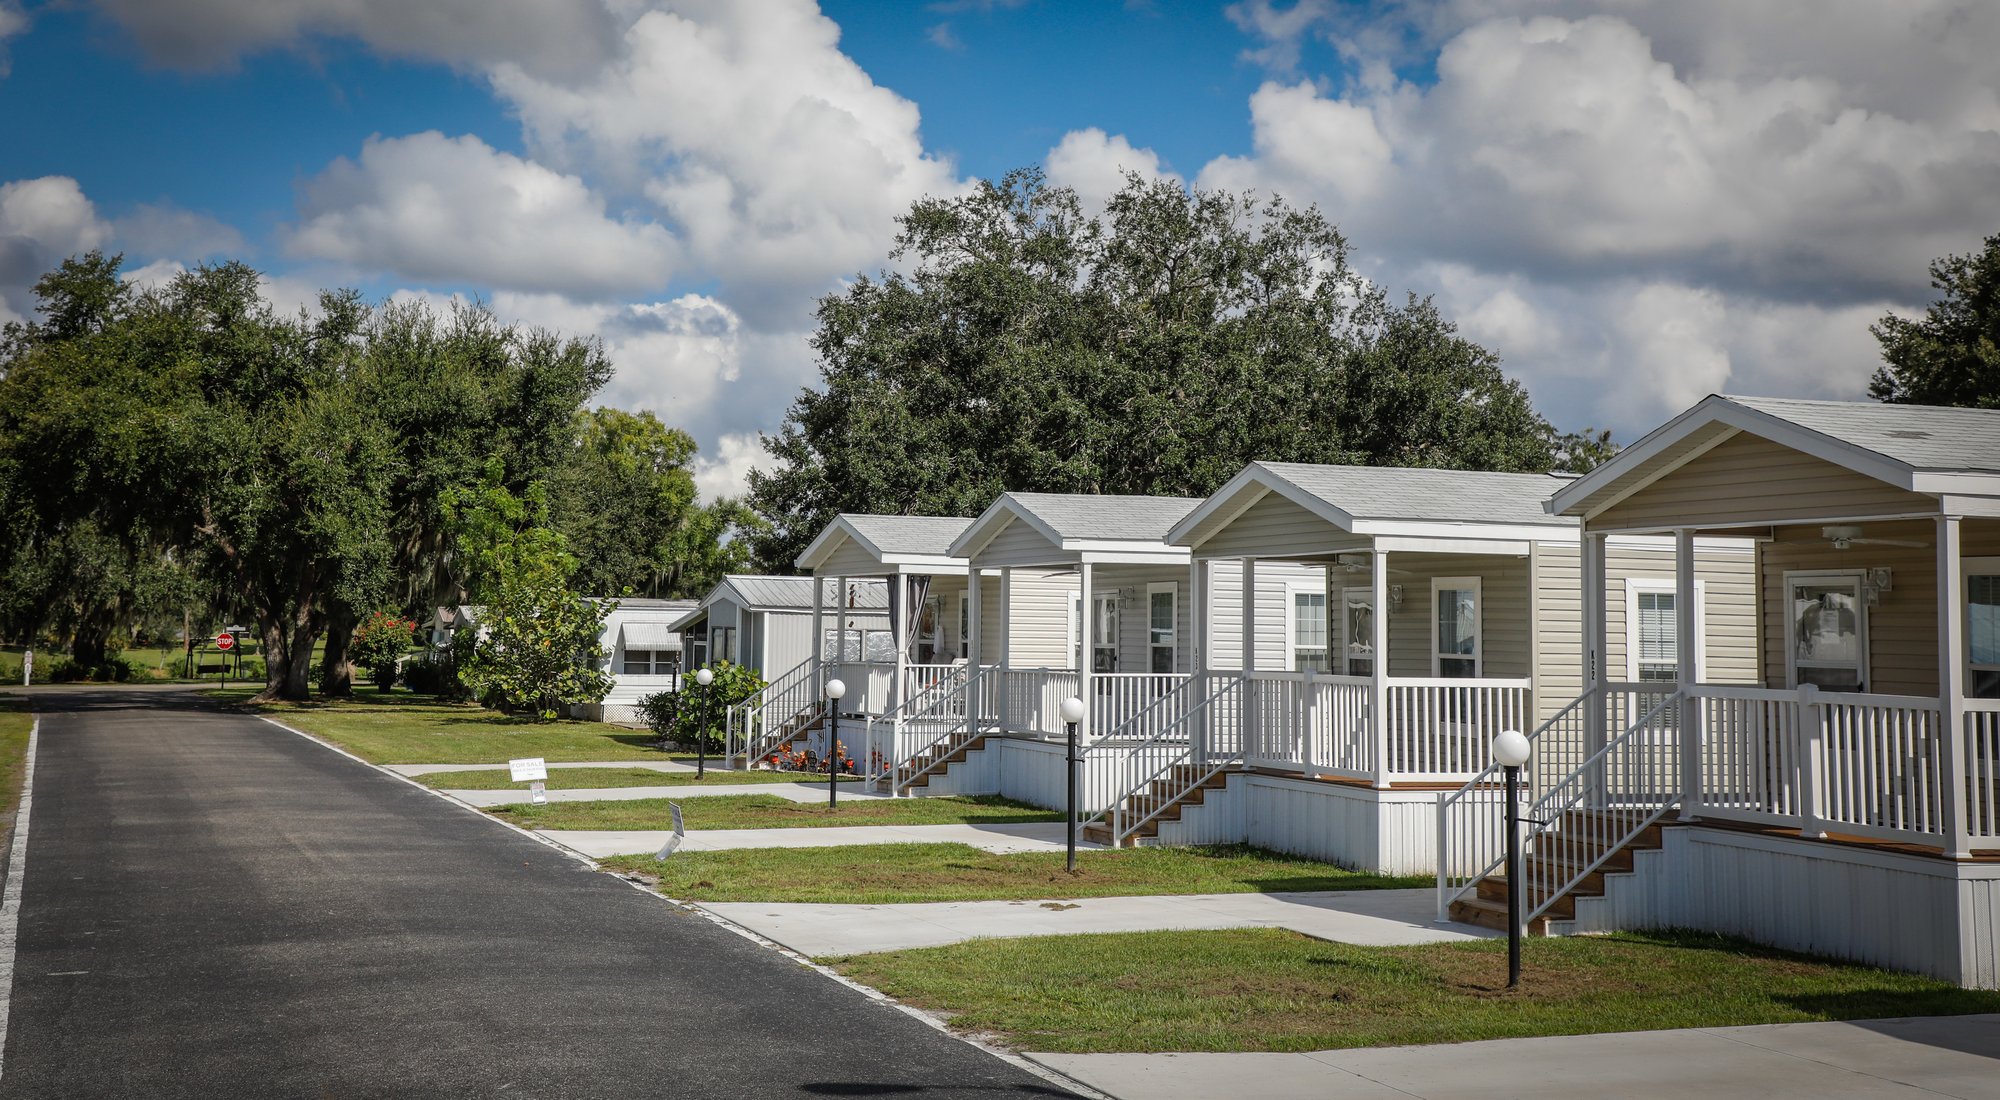 Roots' Quality Manufactured Homes with Modern Amenities